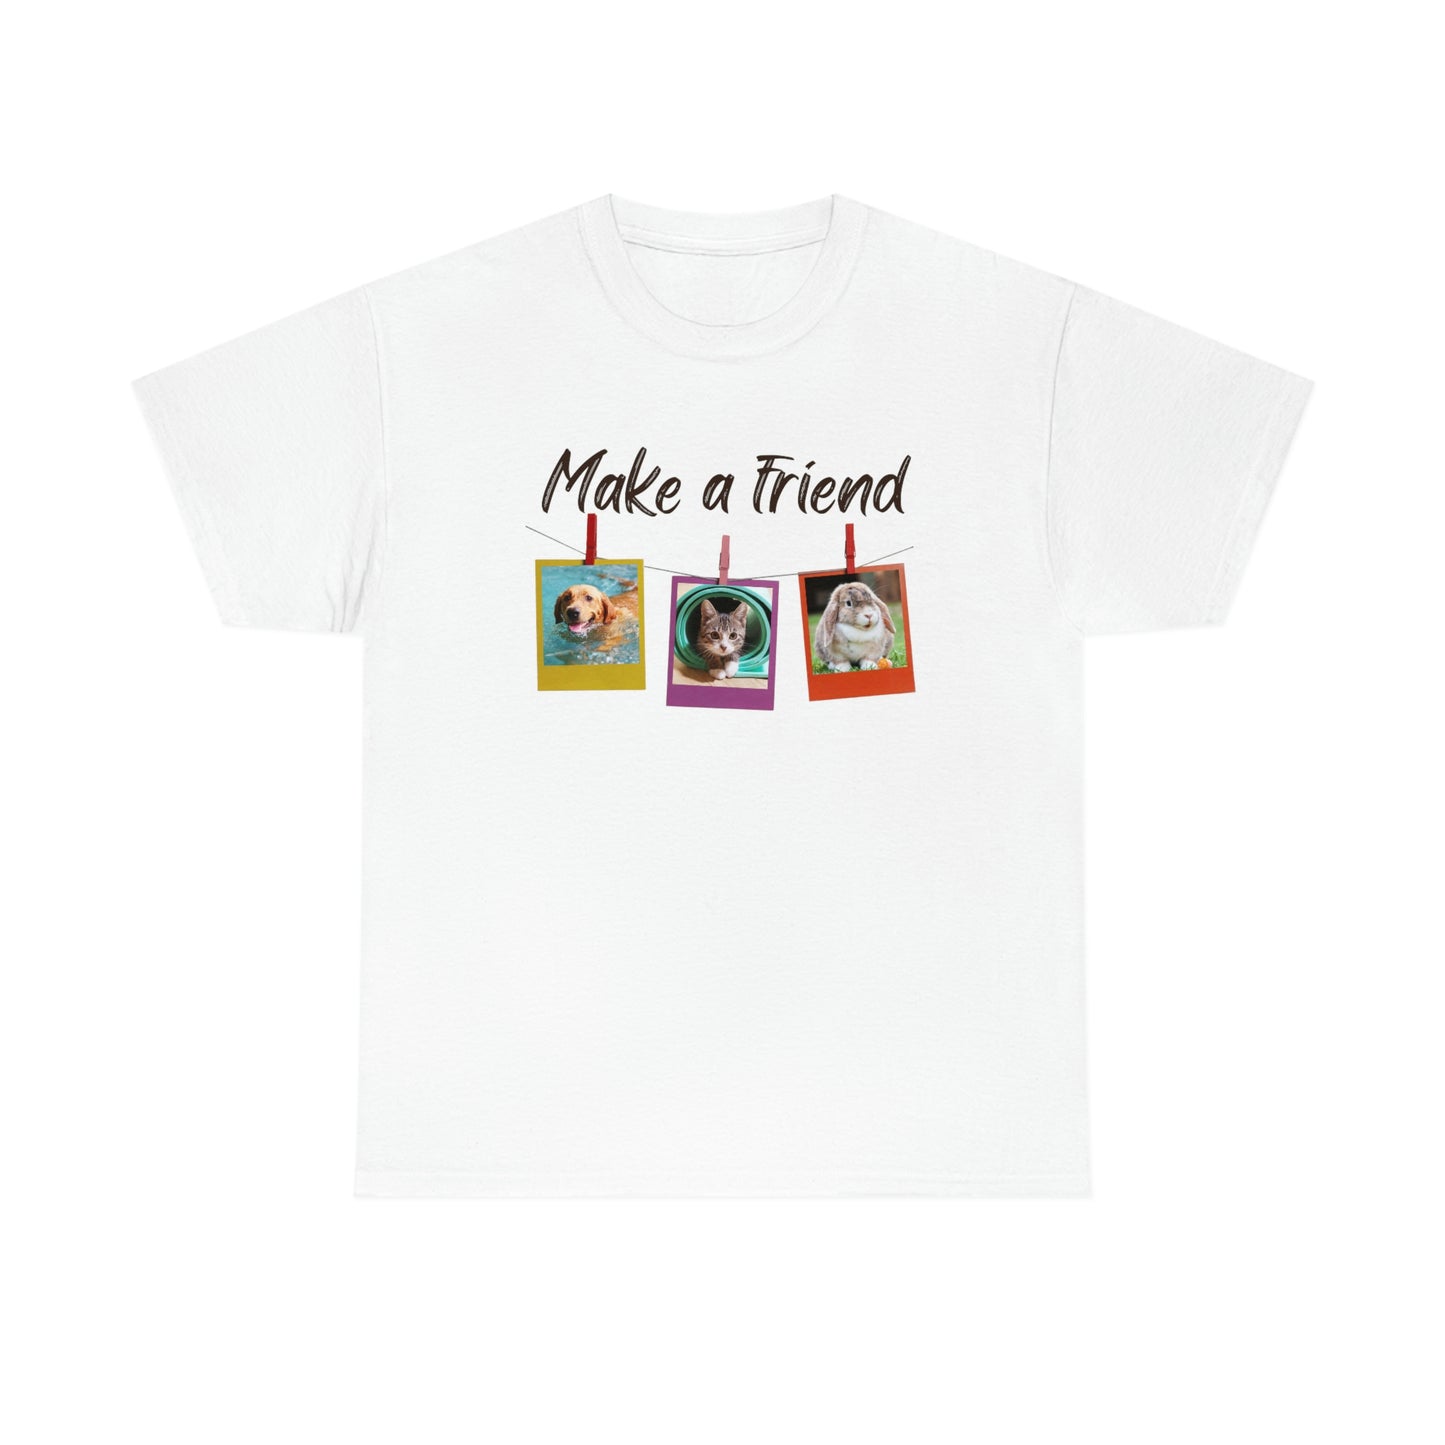 Make a Friend Dog, Bunny and Cat/Kitten photo frame design Graphic tee shirt